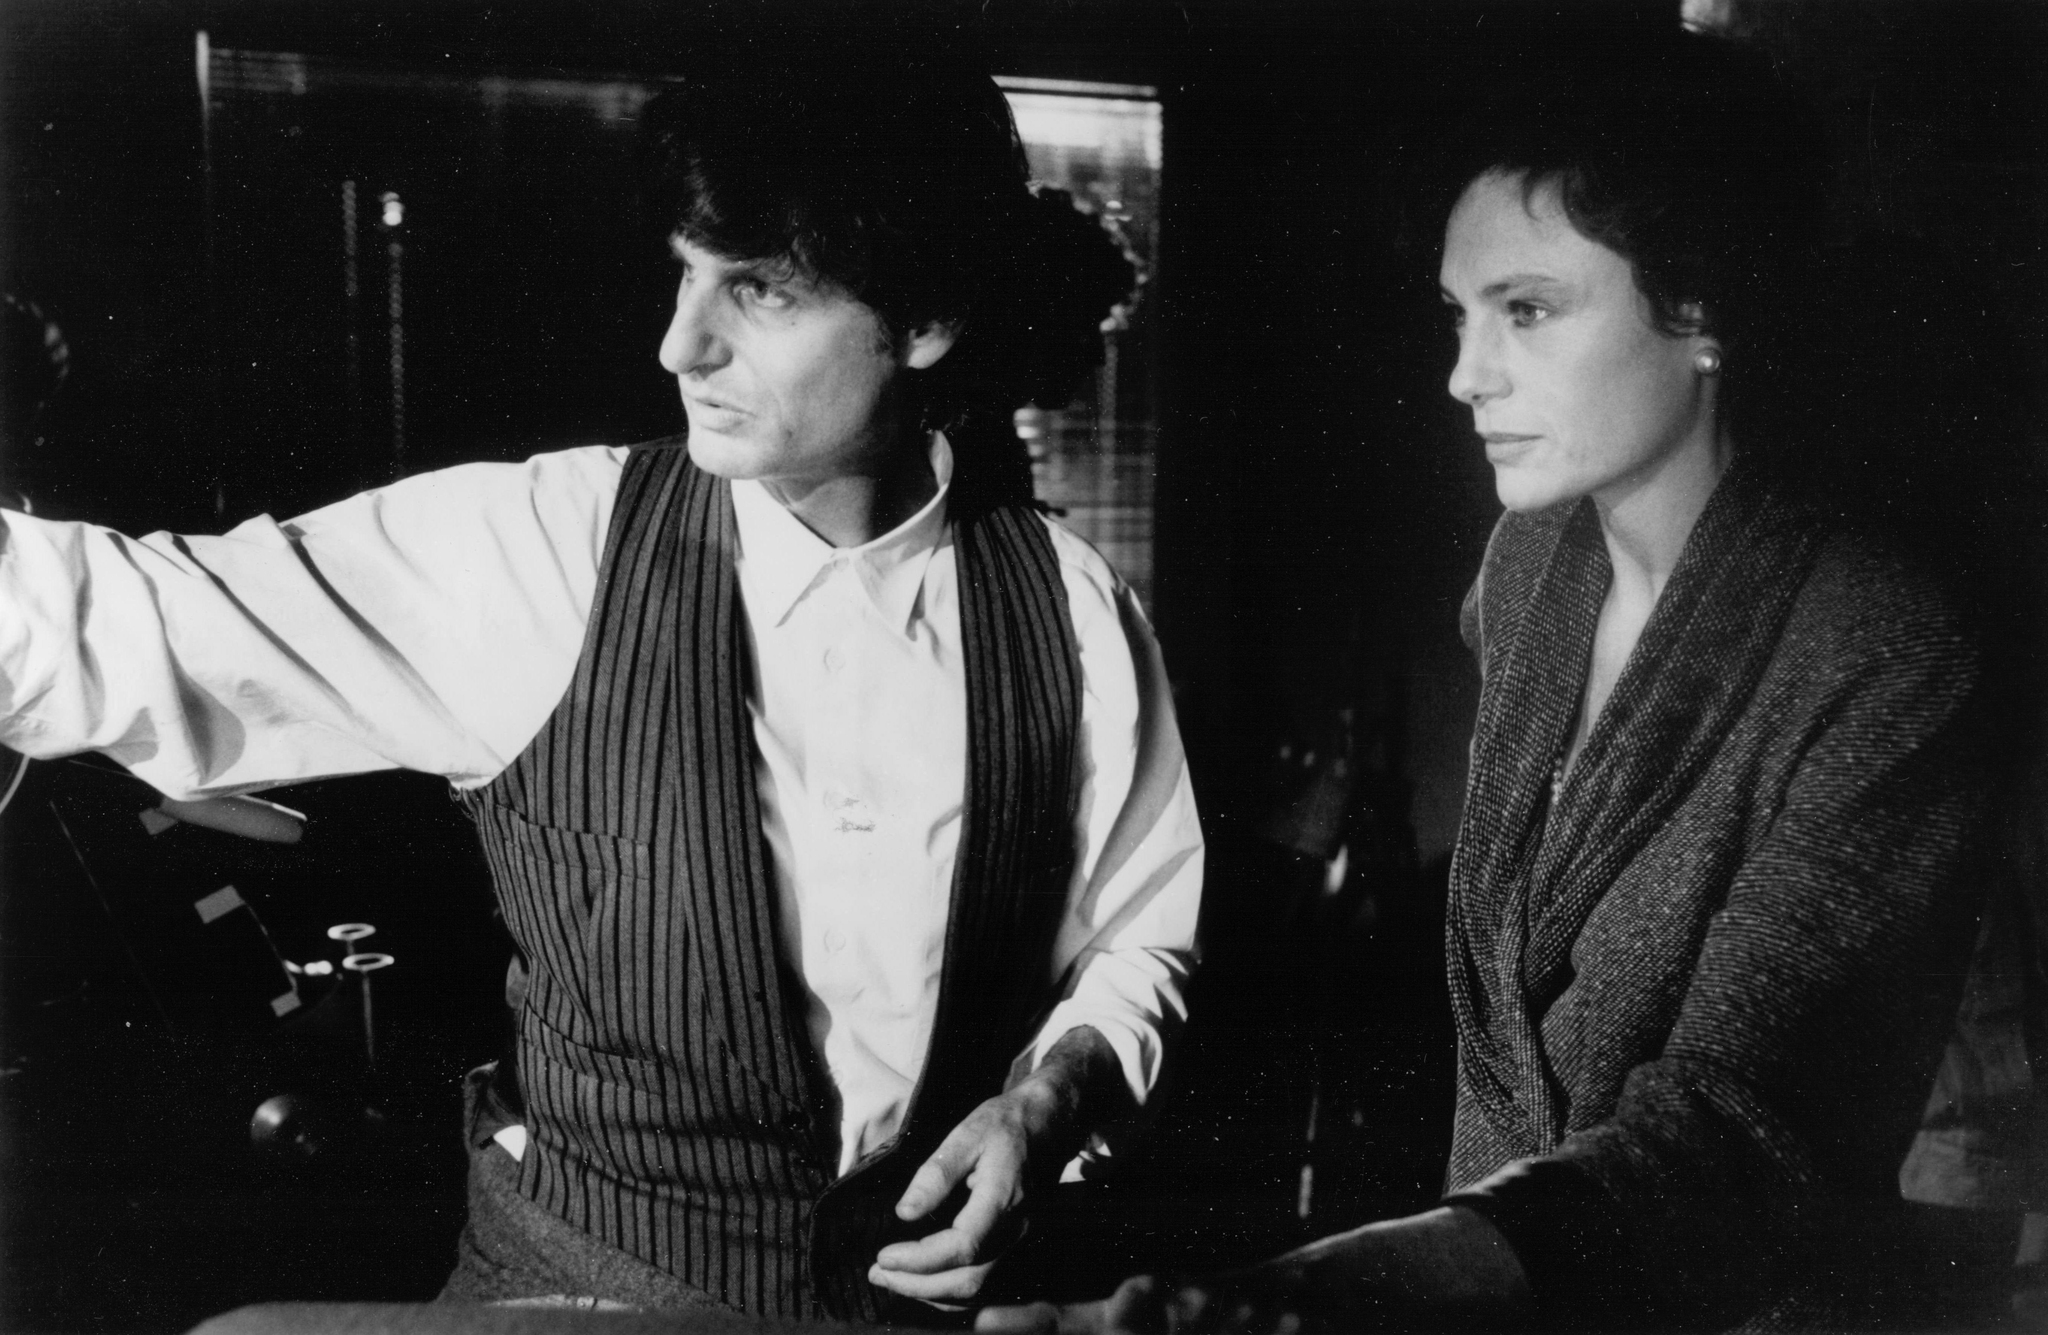 Still of Jacqueline Bisset and Zalman King in Wild Orchid (1989)